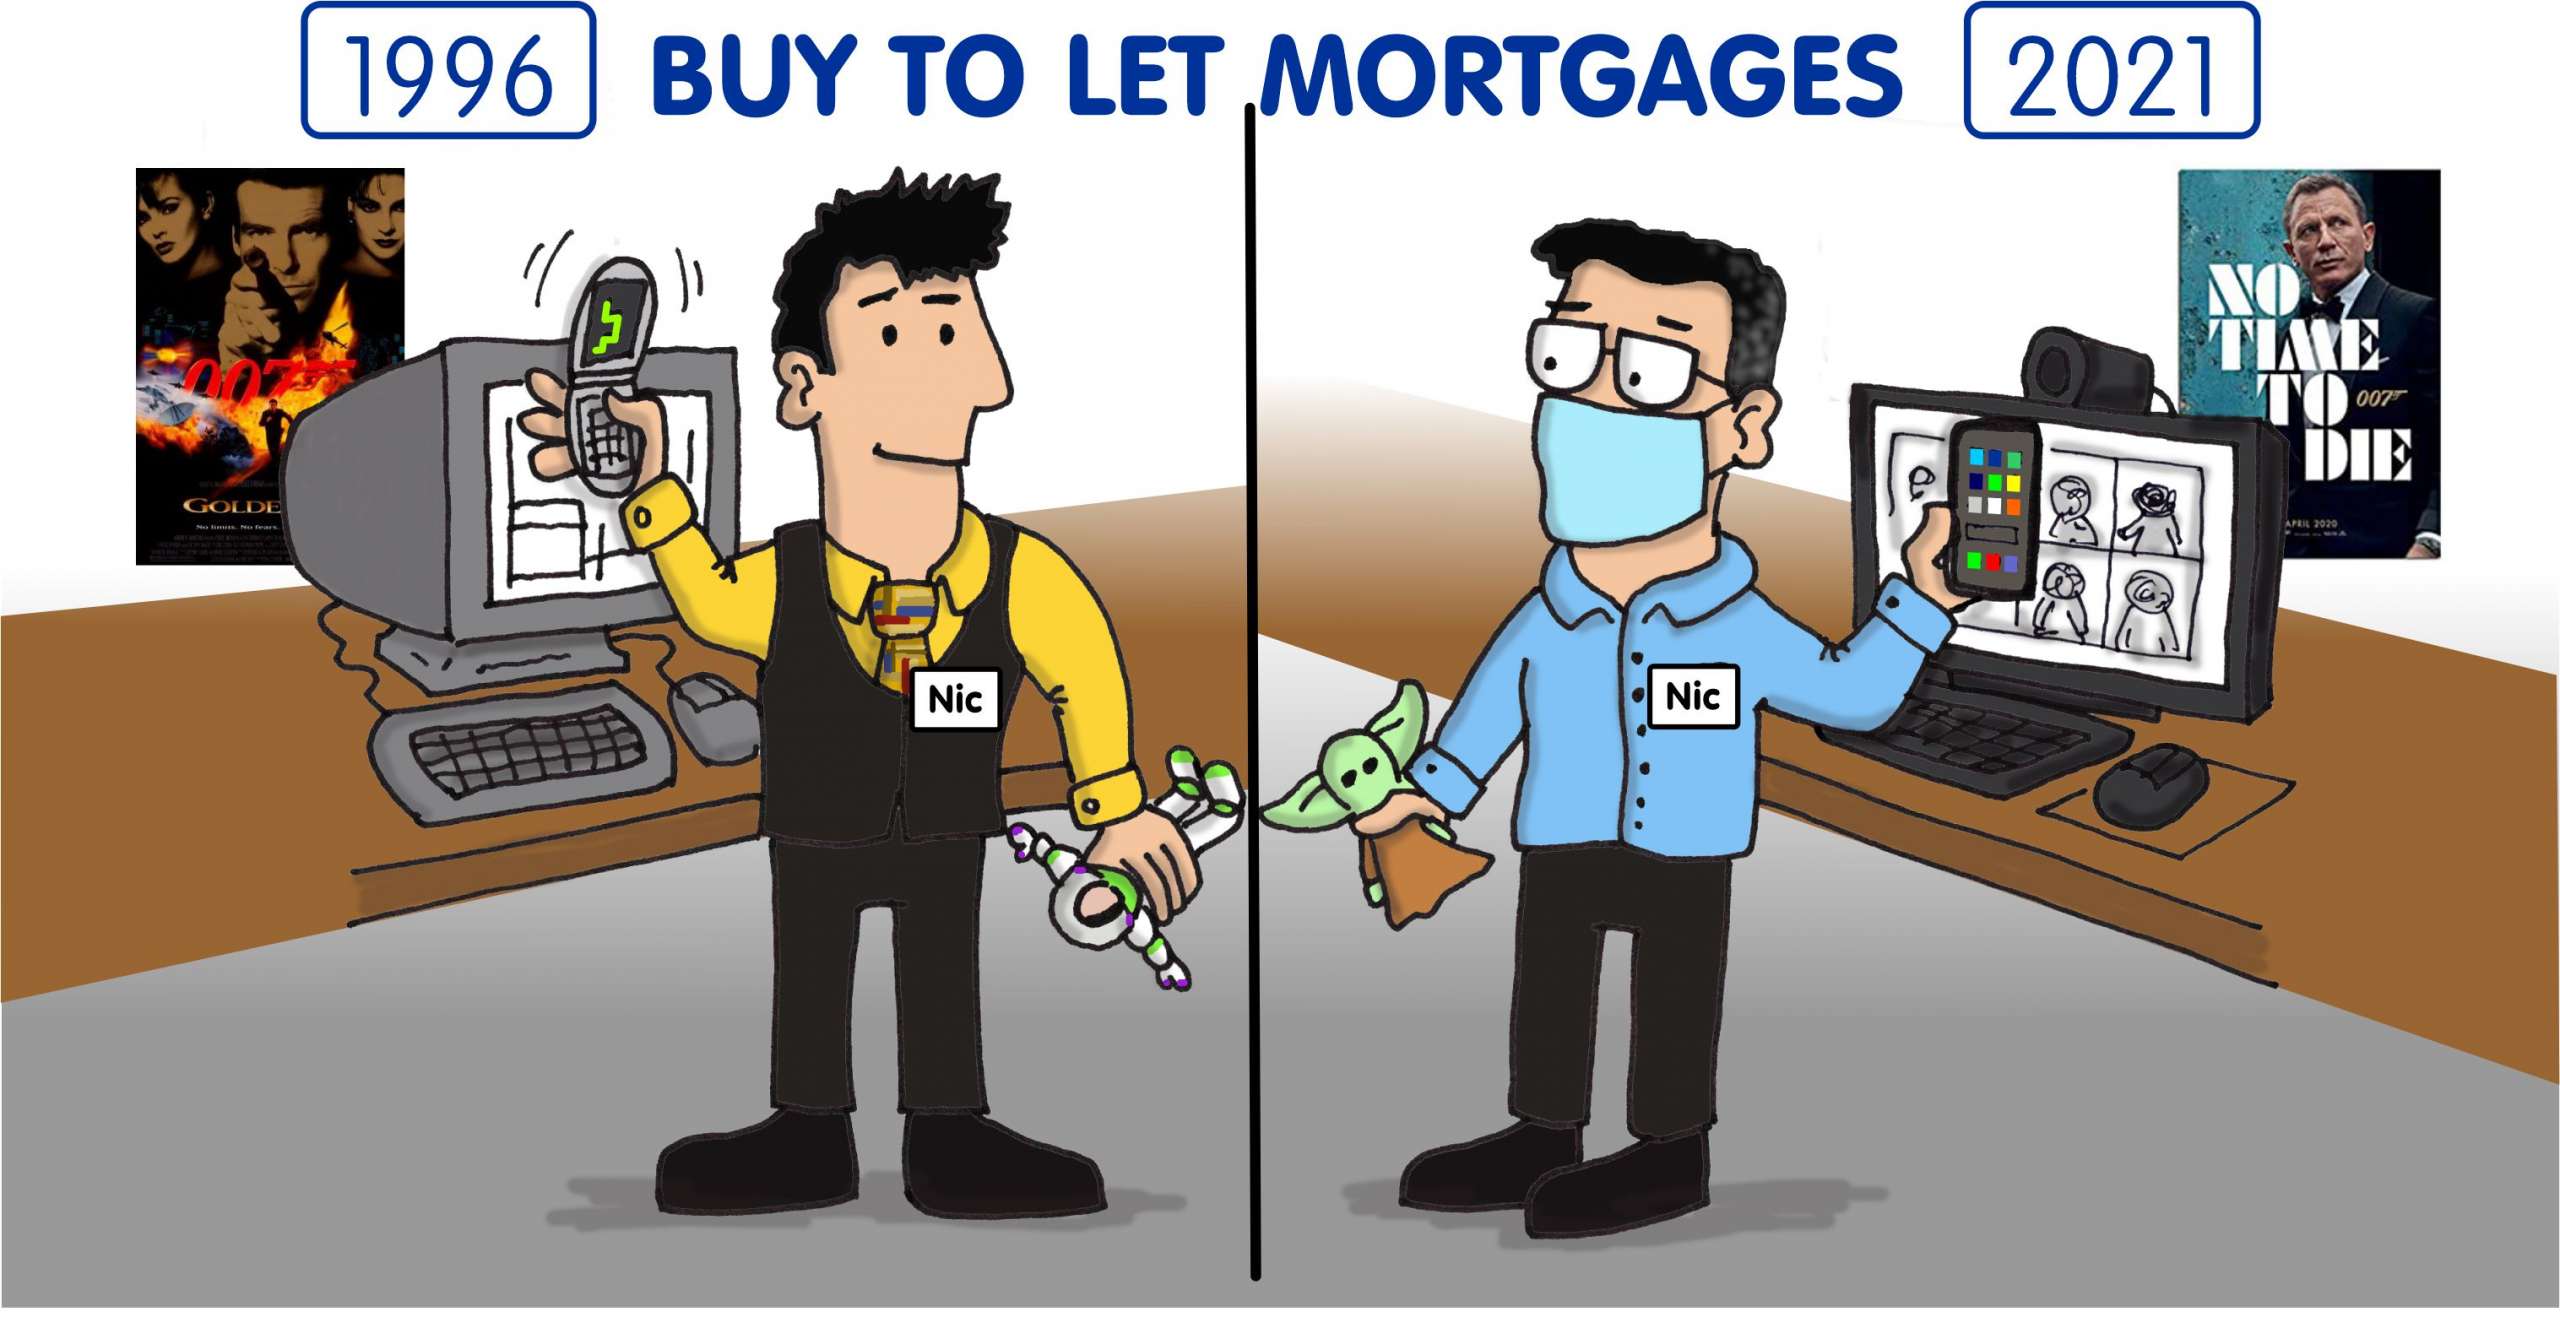 Buy To Let Mortgages is 25